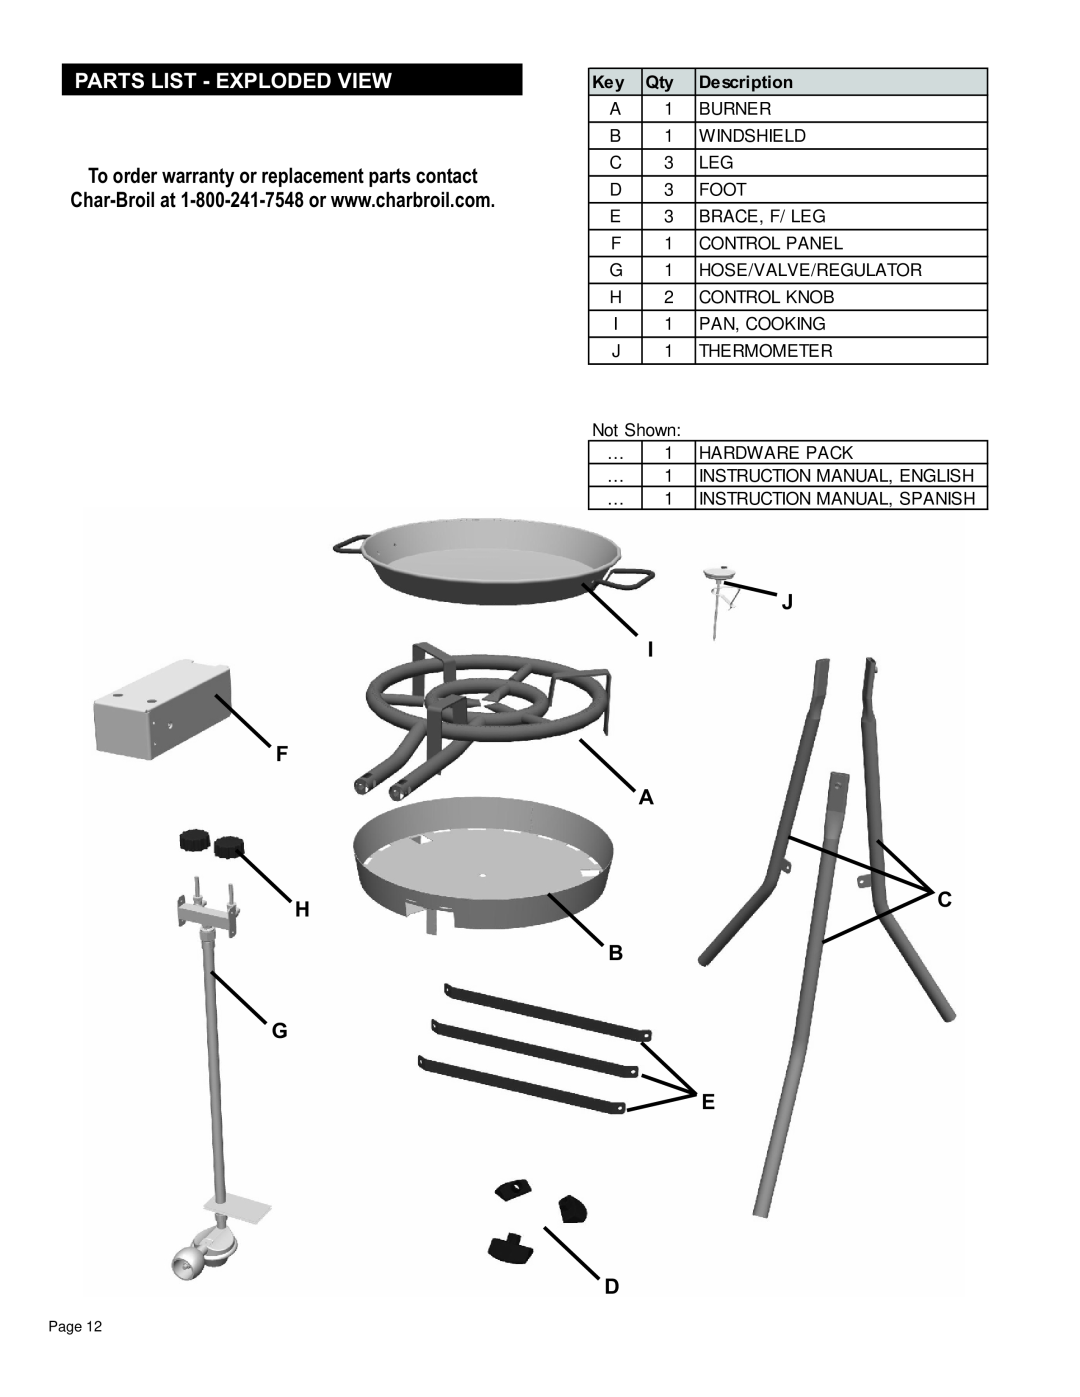 Char-Broil 11101706 manual Parts List - Exploded View, To order warranty or replacement parts contact, F H G, J I A C B E D 